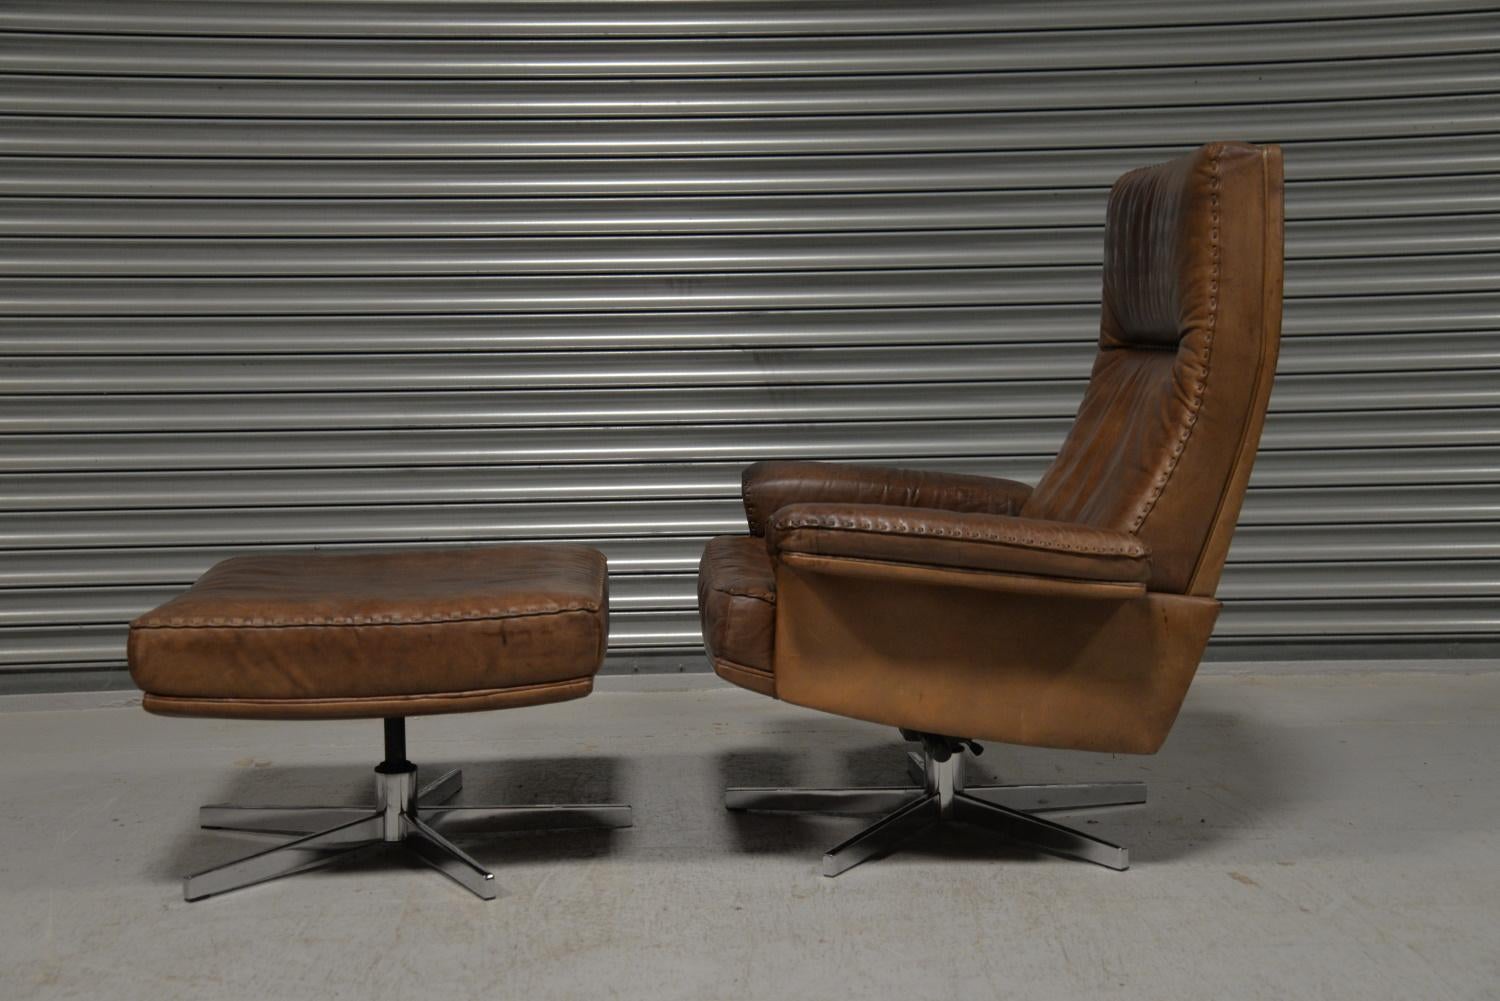 We are delighted to bring to you a highly desirable and rarely available vintage 1970s De Sede DS 35 high back swivel armchair with ottoman. Hand built in the 1970s by De Sede craftsman in Switzerland. The swivel armchair and ottoman Stand on a